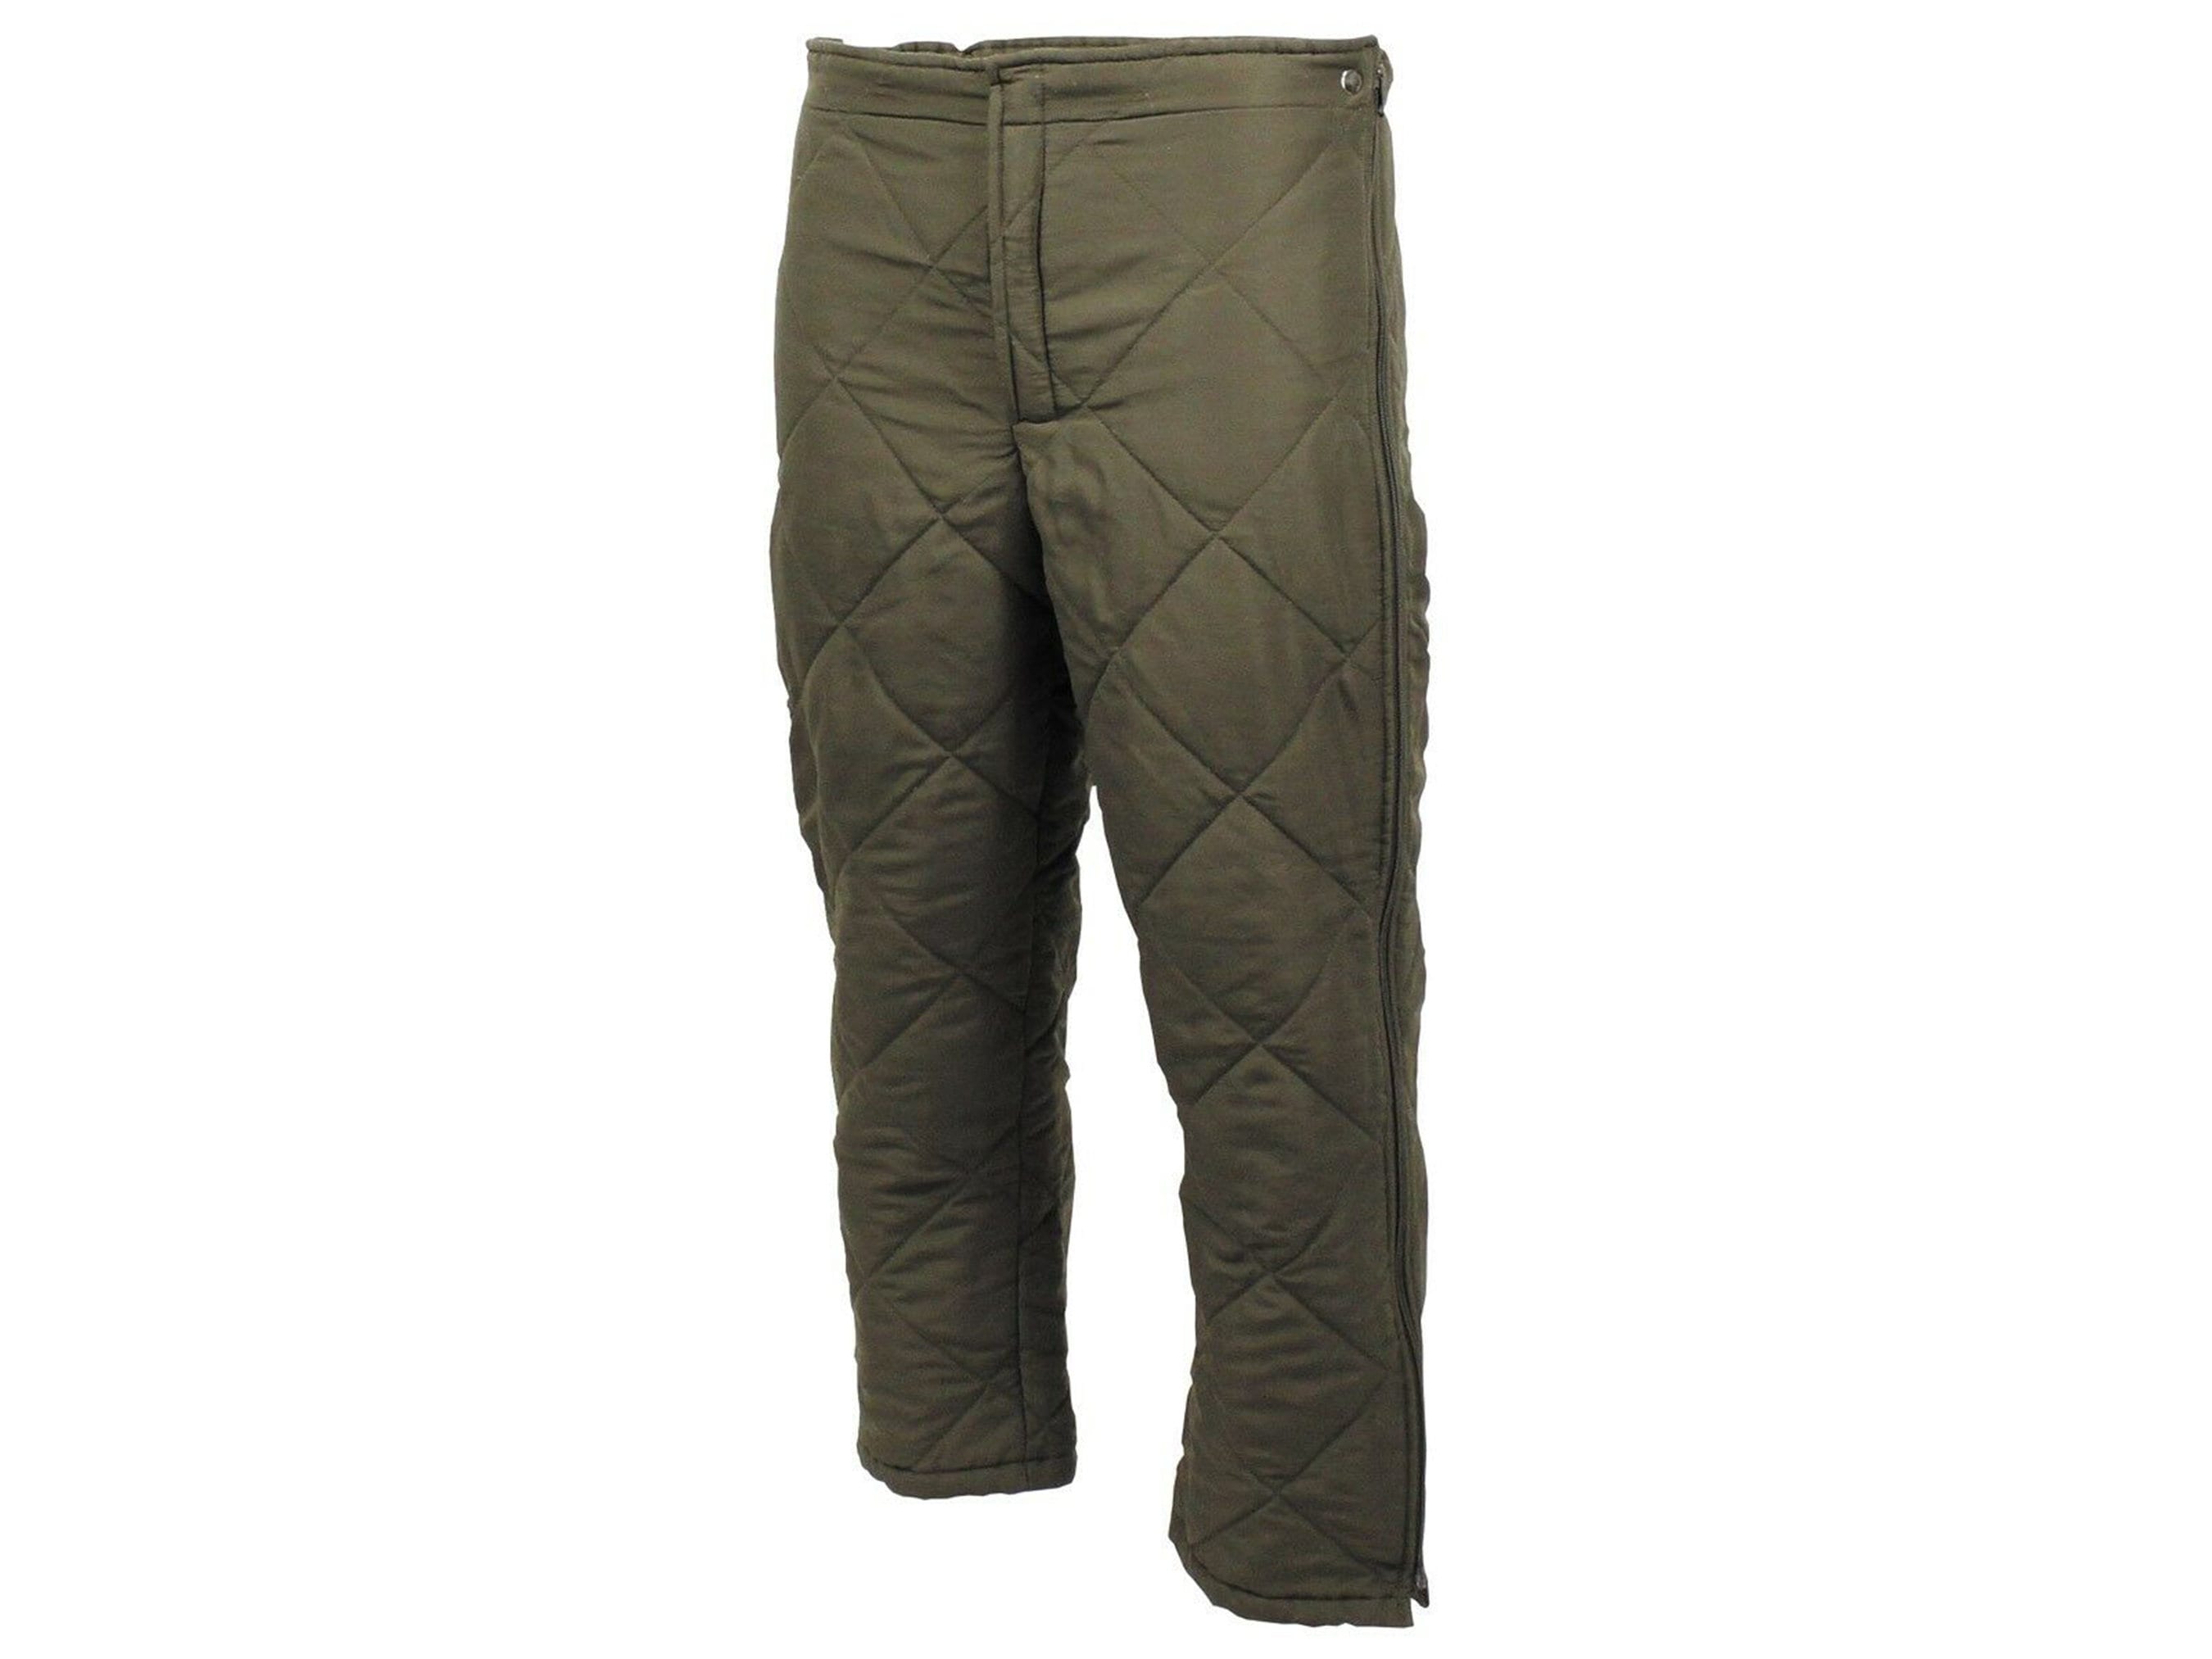 Genuine Austrian army quilt pants liners Warmer olive green thermal